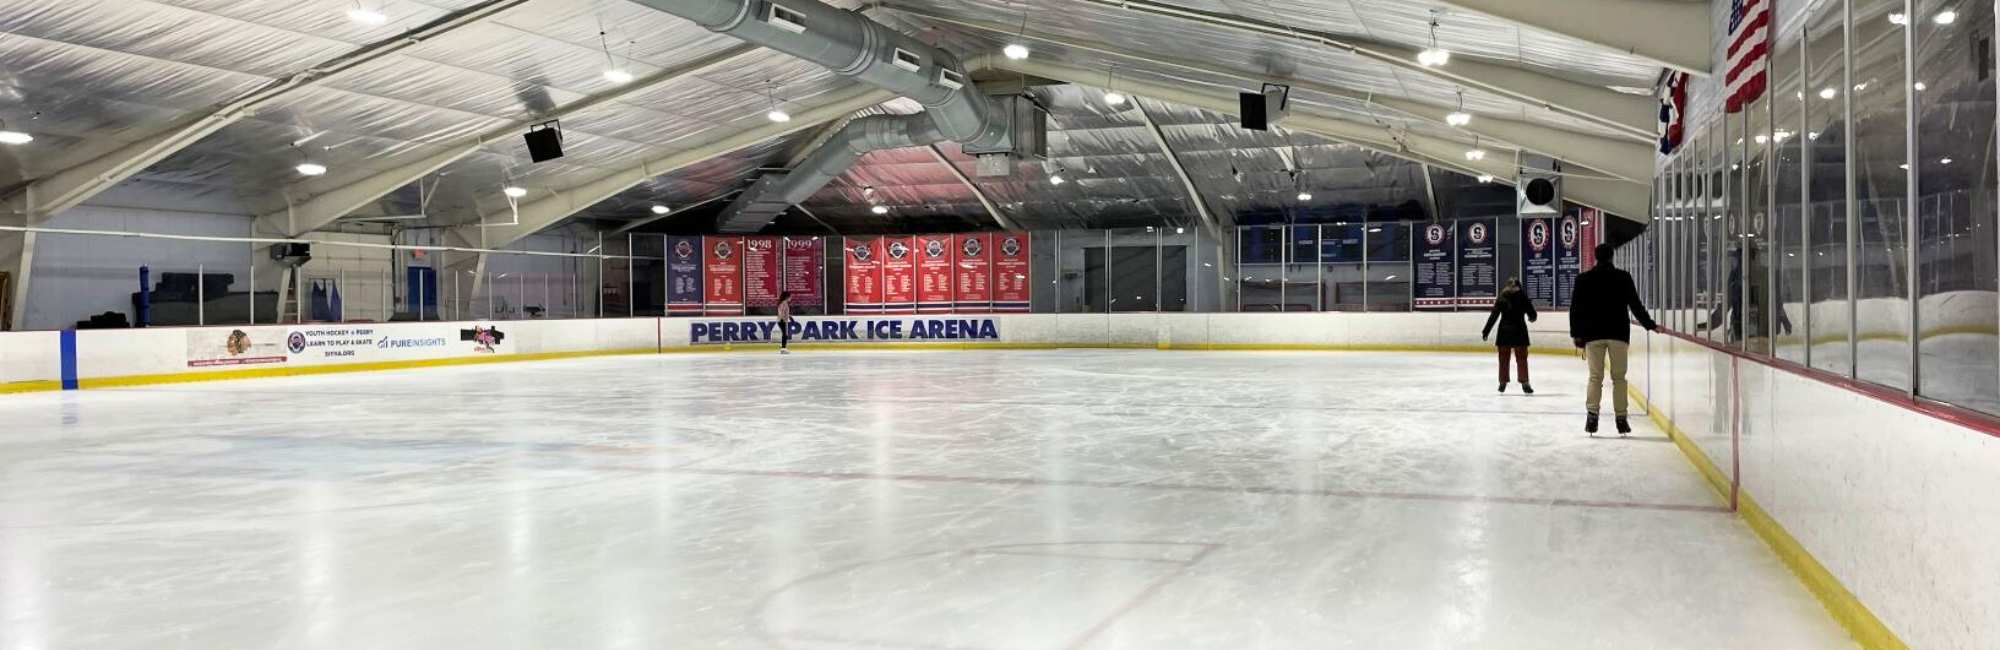 Perry Park Ice Arena